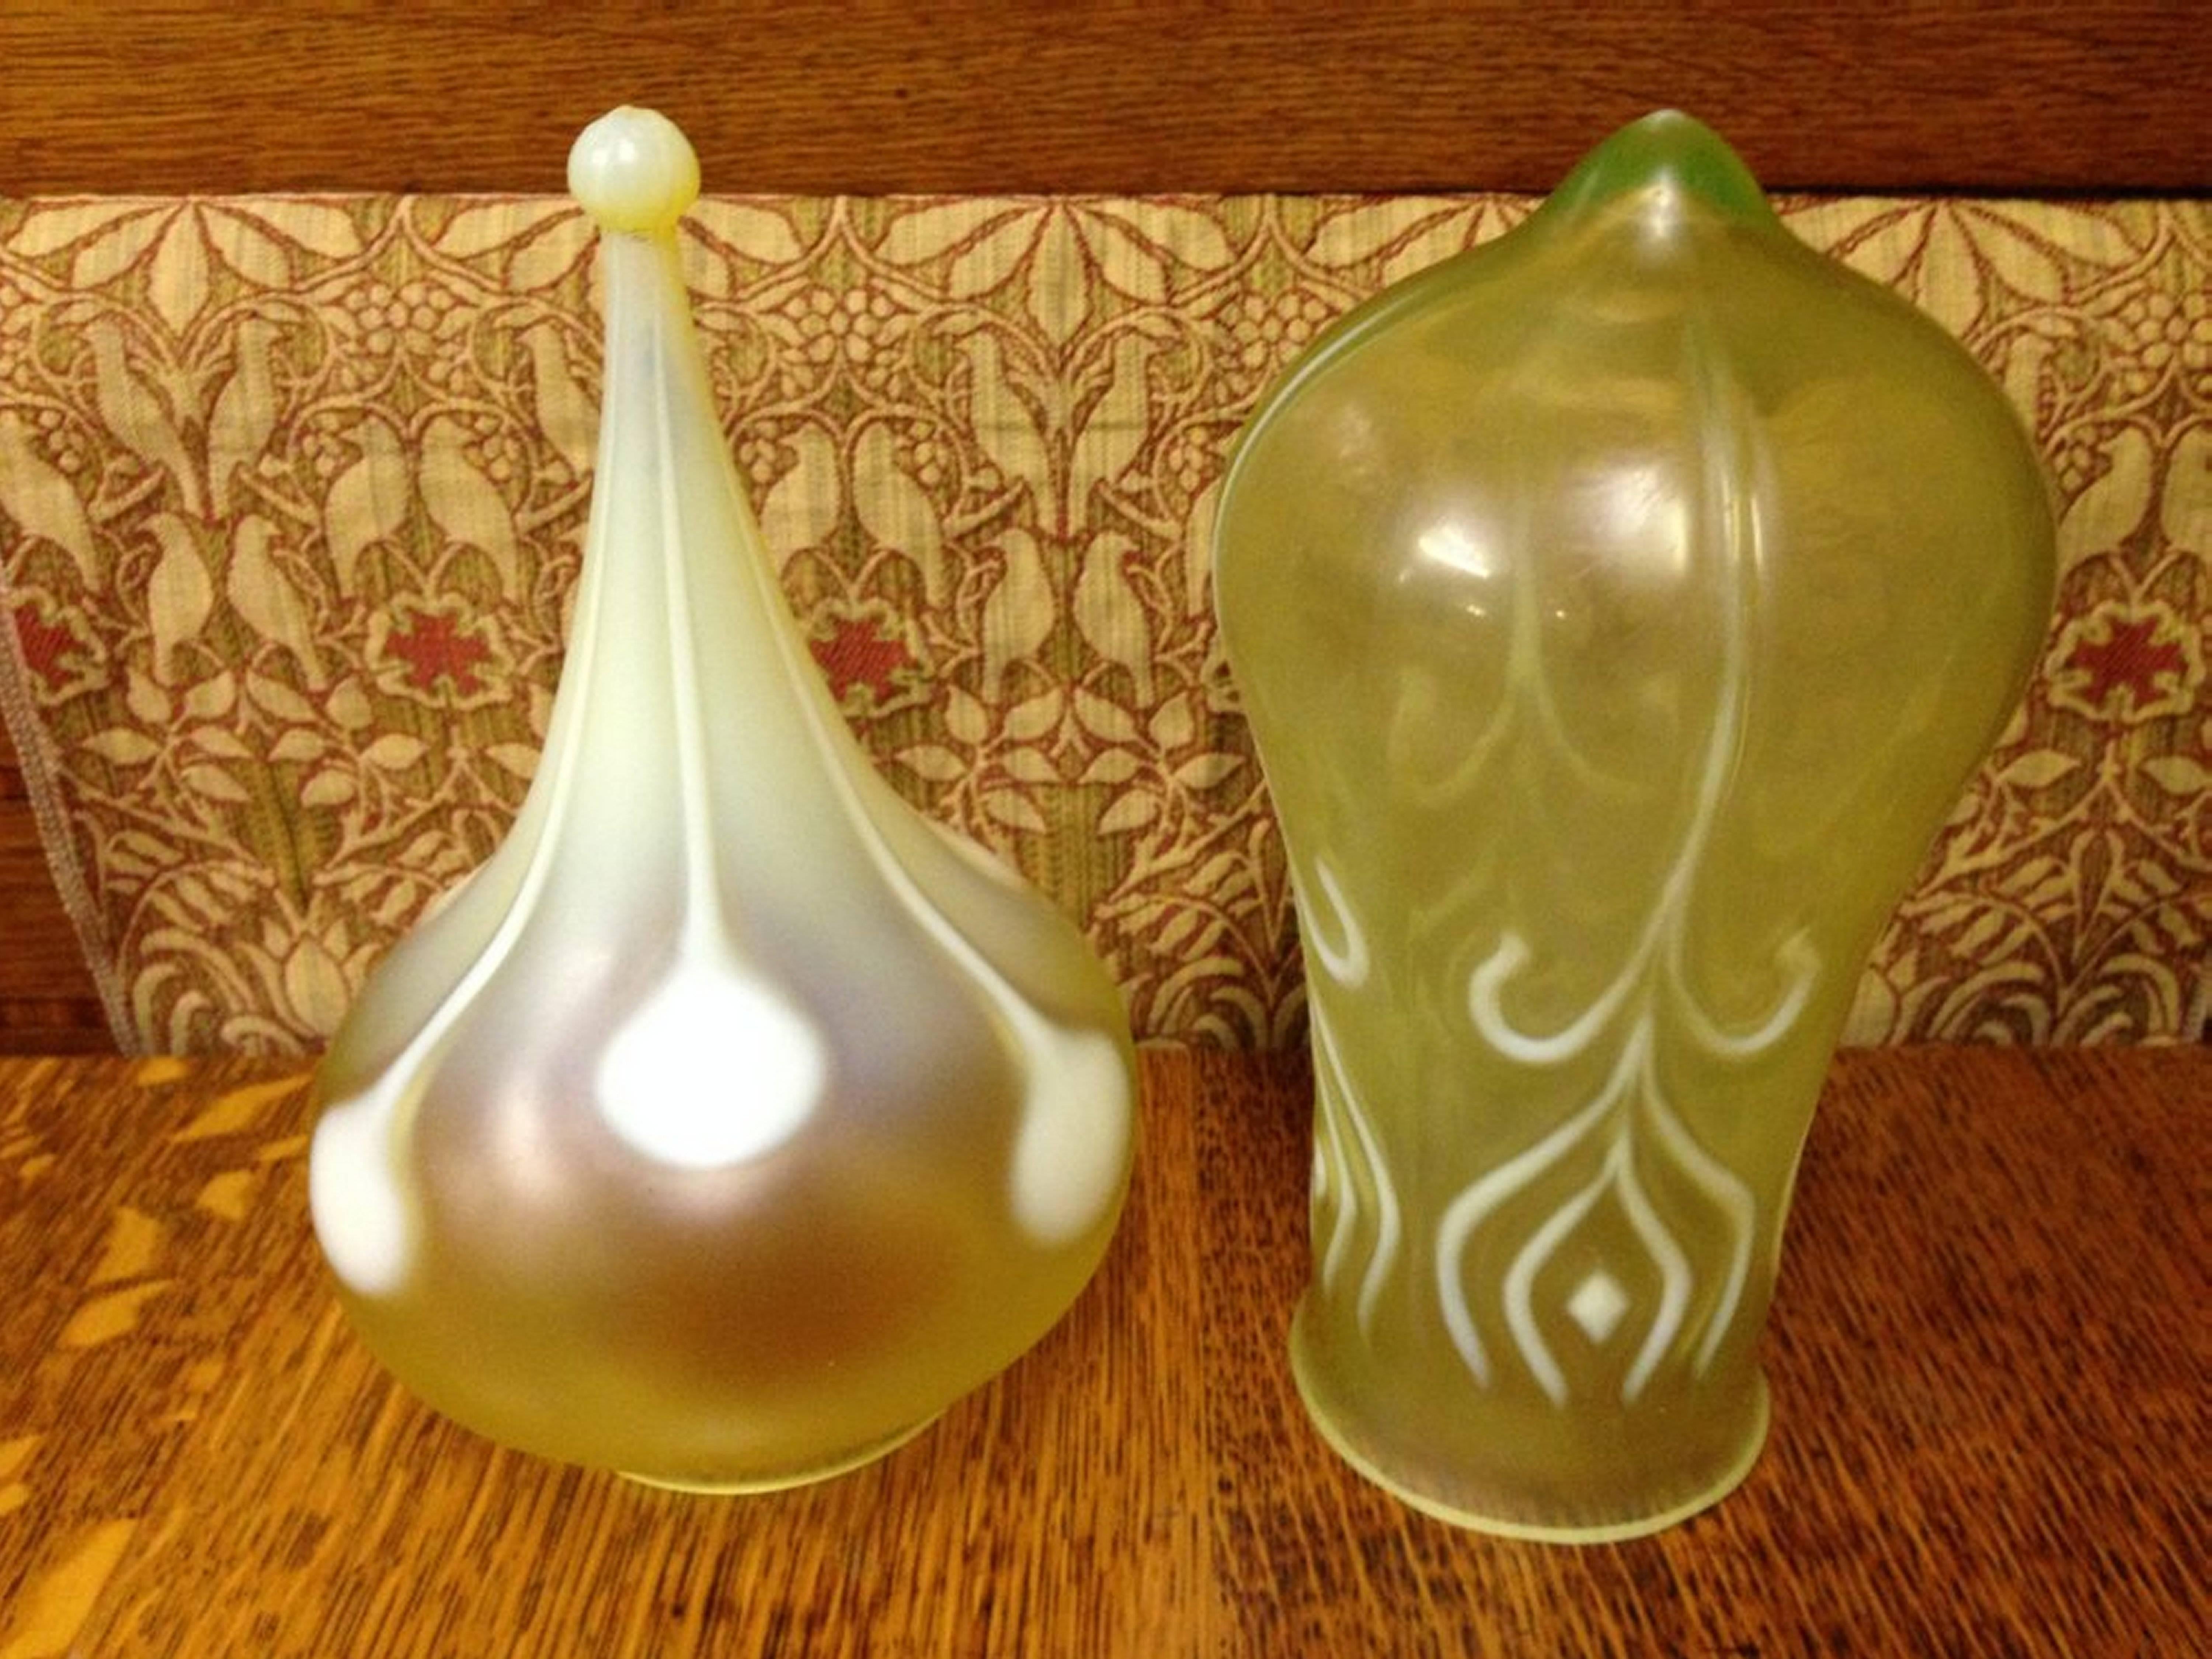 A spot teardrop shade (left) and a peacock feather Arts and Crafts Vaseline/Uranium Glass Shades  (right).
Measures: Left height 8